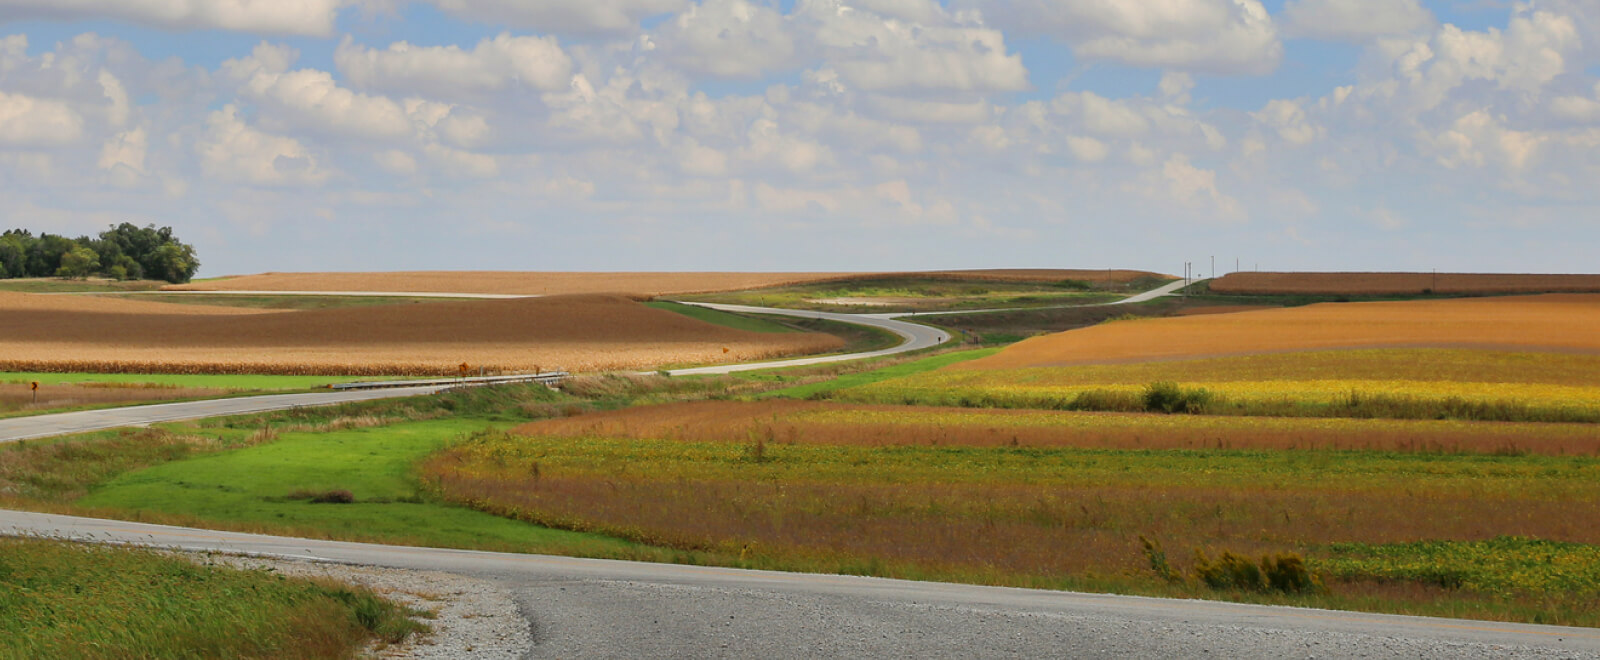 scenic view of fields and road